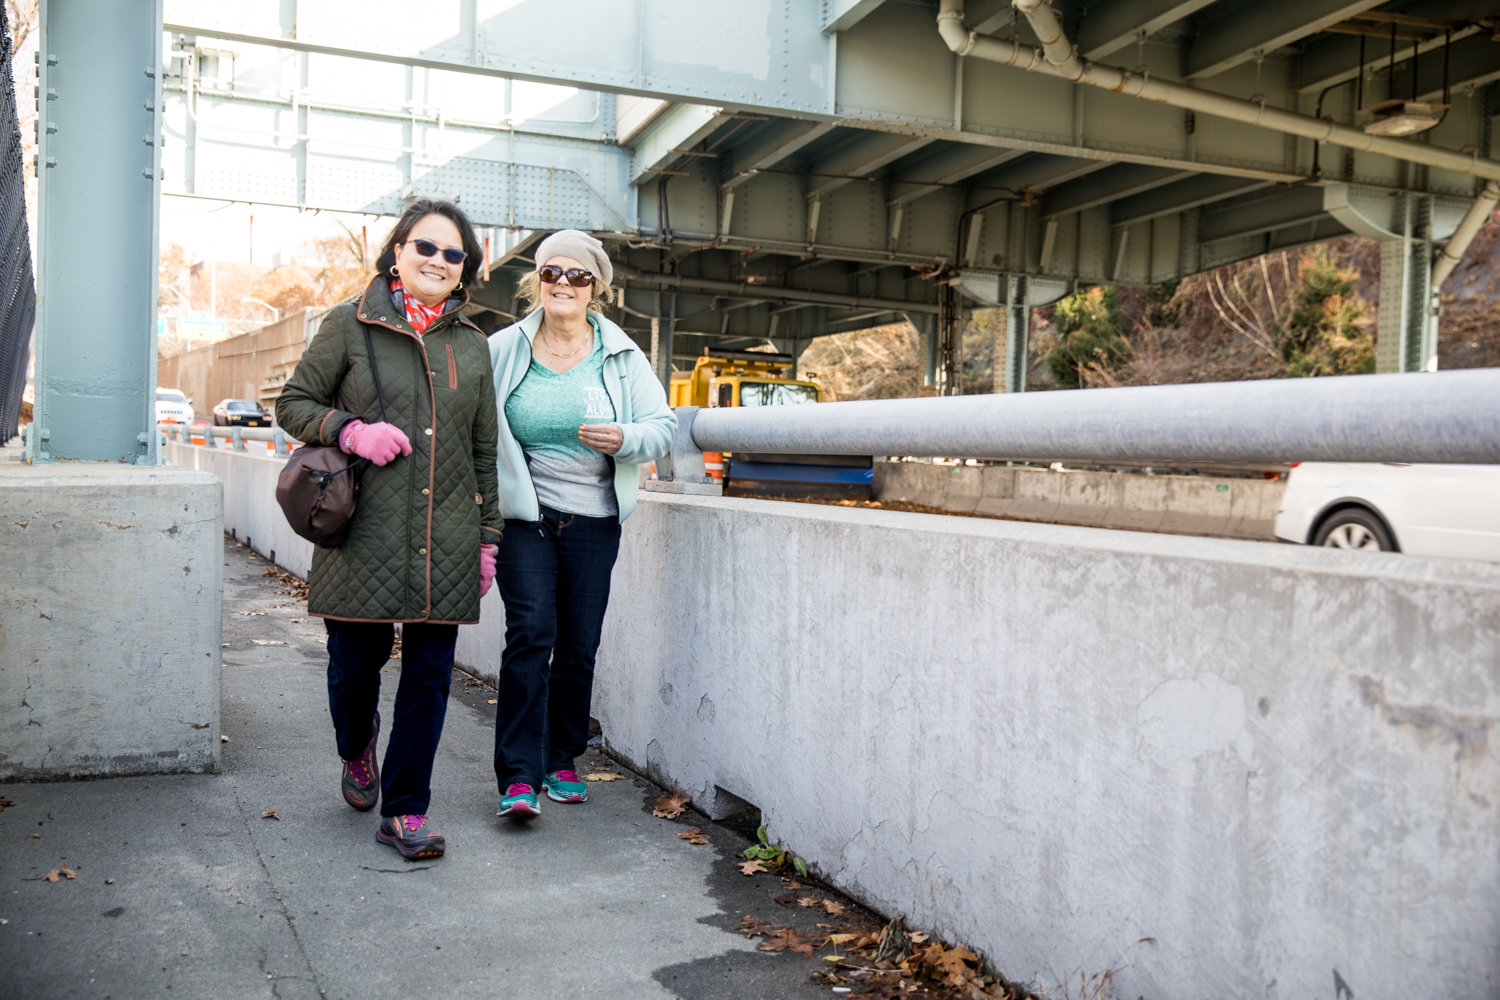 Sherrie Lem, left, and Melissa Schori walk toward Manhattan via the pedestrian walkway on the Henry Hudson Bridge. Lem and Schori are thrilled the walkway is open after being closed for more than a year.